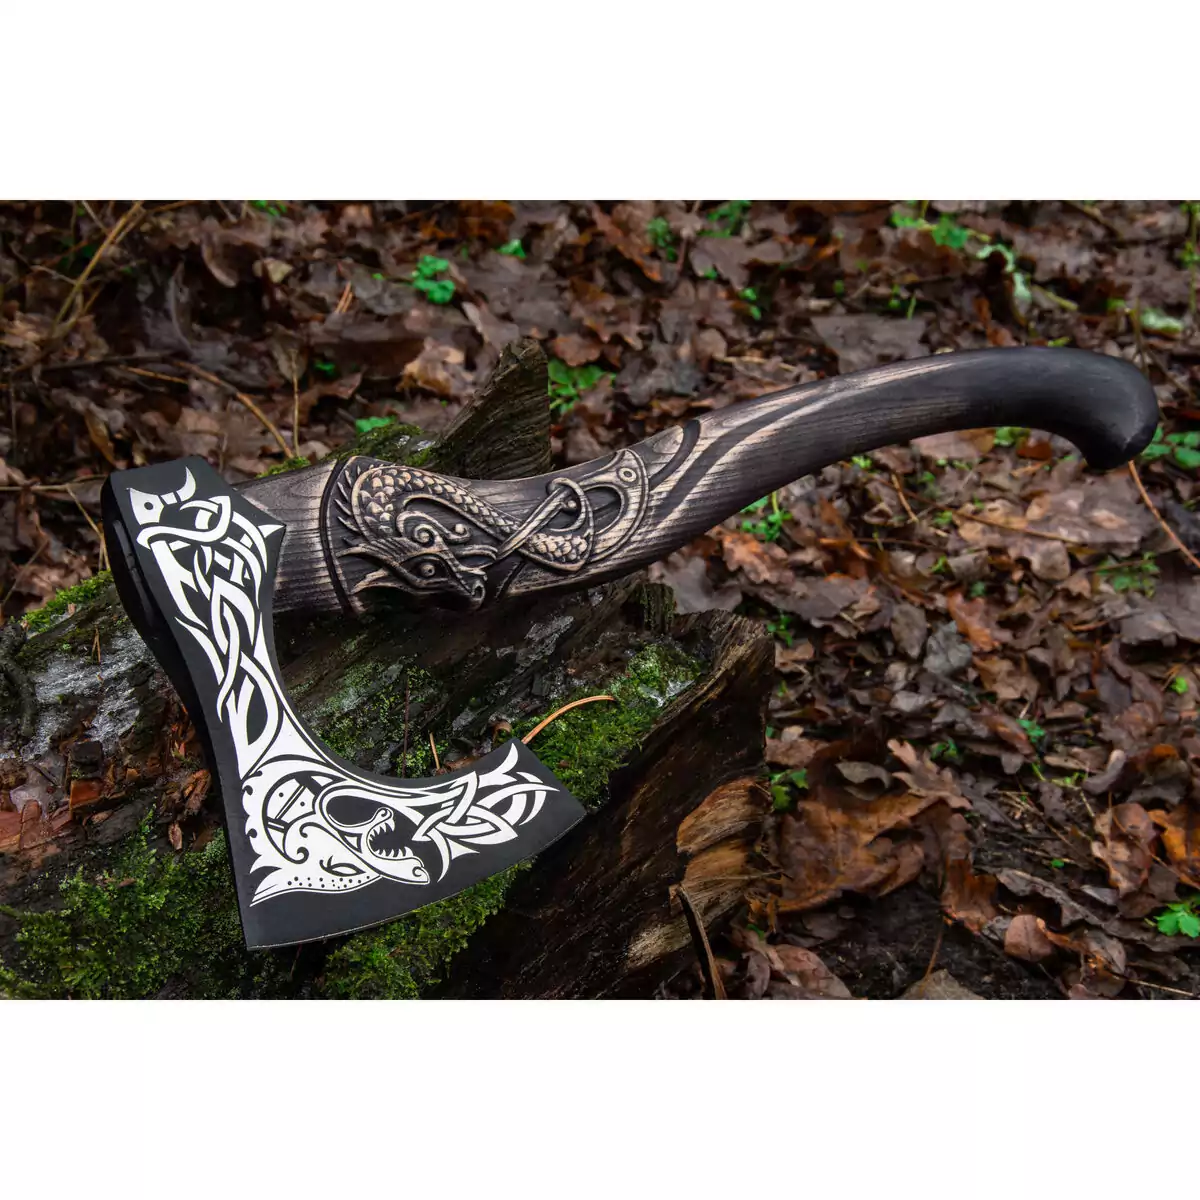 Forged ax "God of War" from Topor & Molot